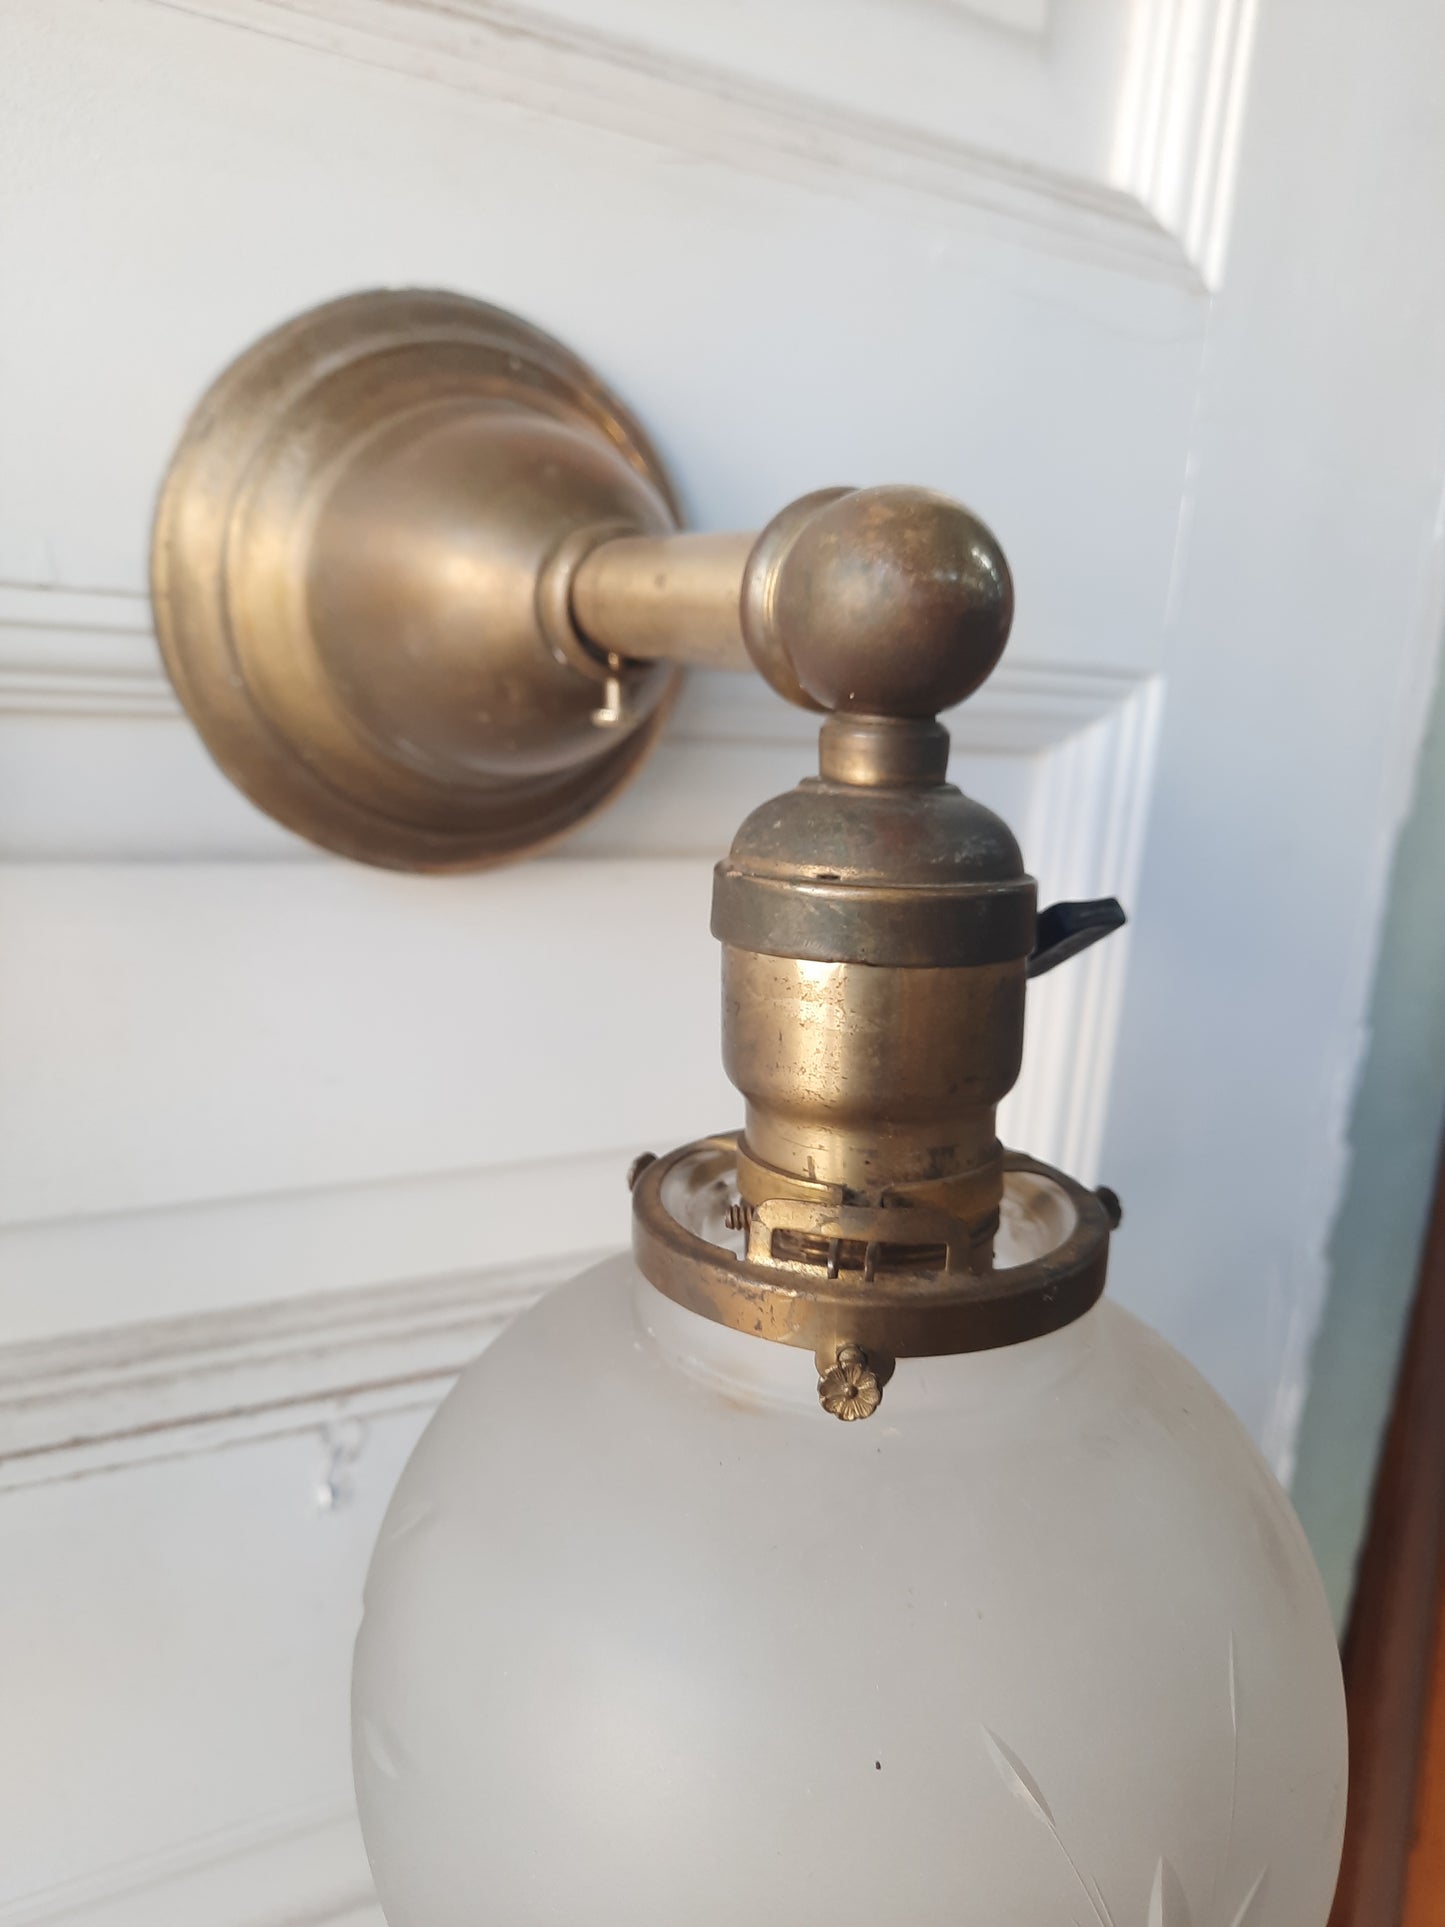 Antique Brass Sconces with Cut Glass Shades, Wall Sconce Lights with Frosted Glass Globes